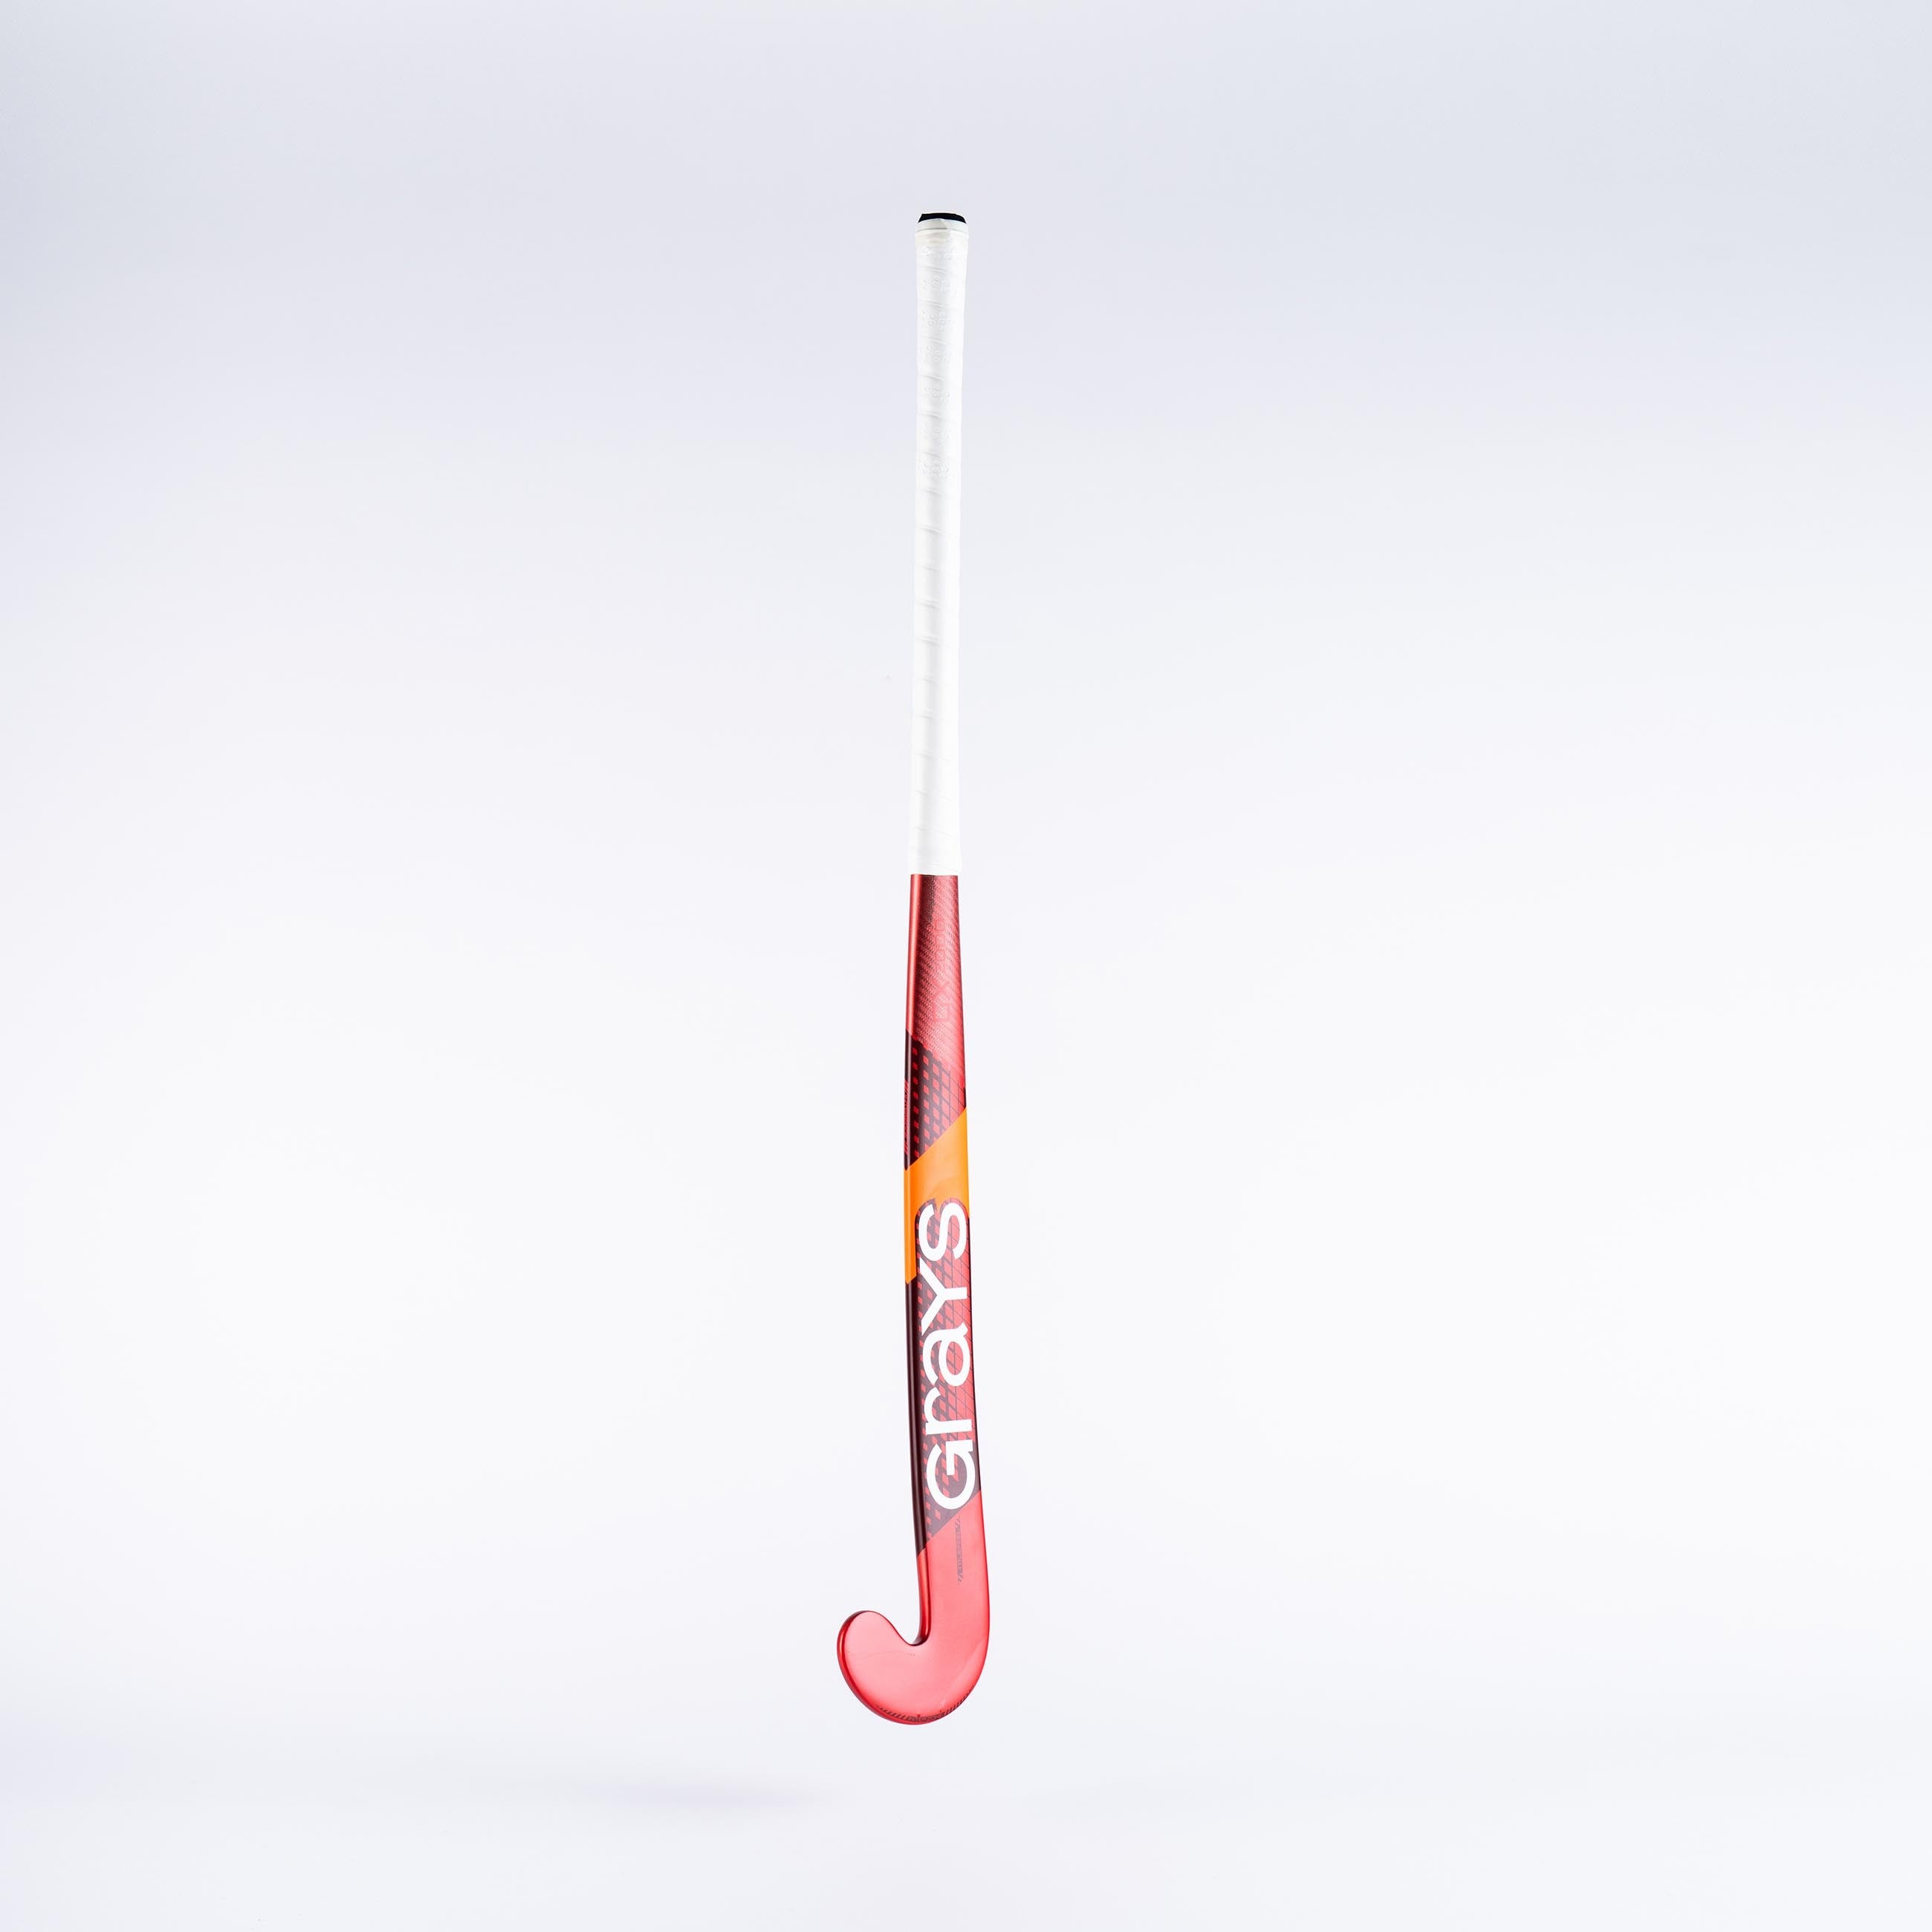 HACD23Composite Sticks GX2000 Dynabow Micro 50 Red, 2 Angle